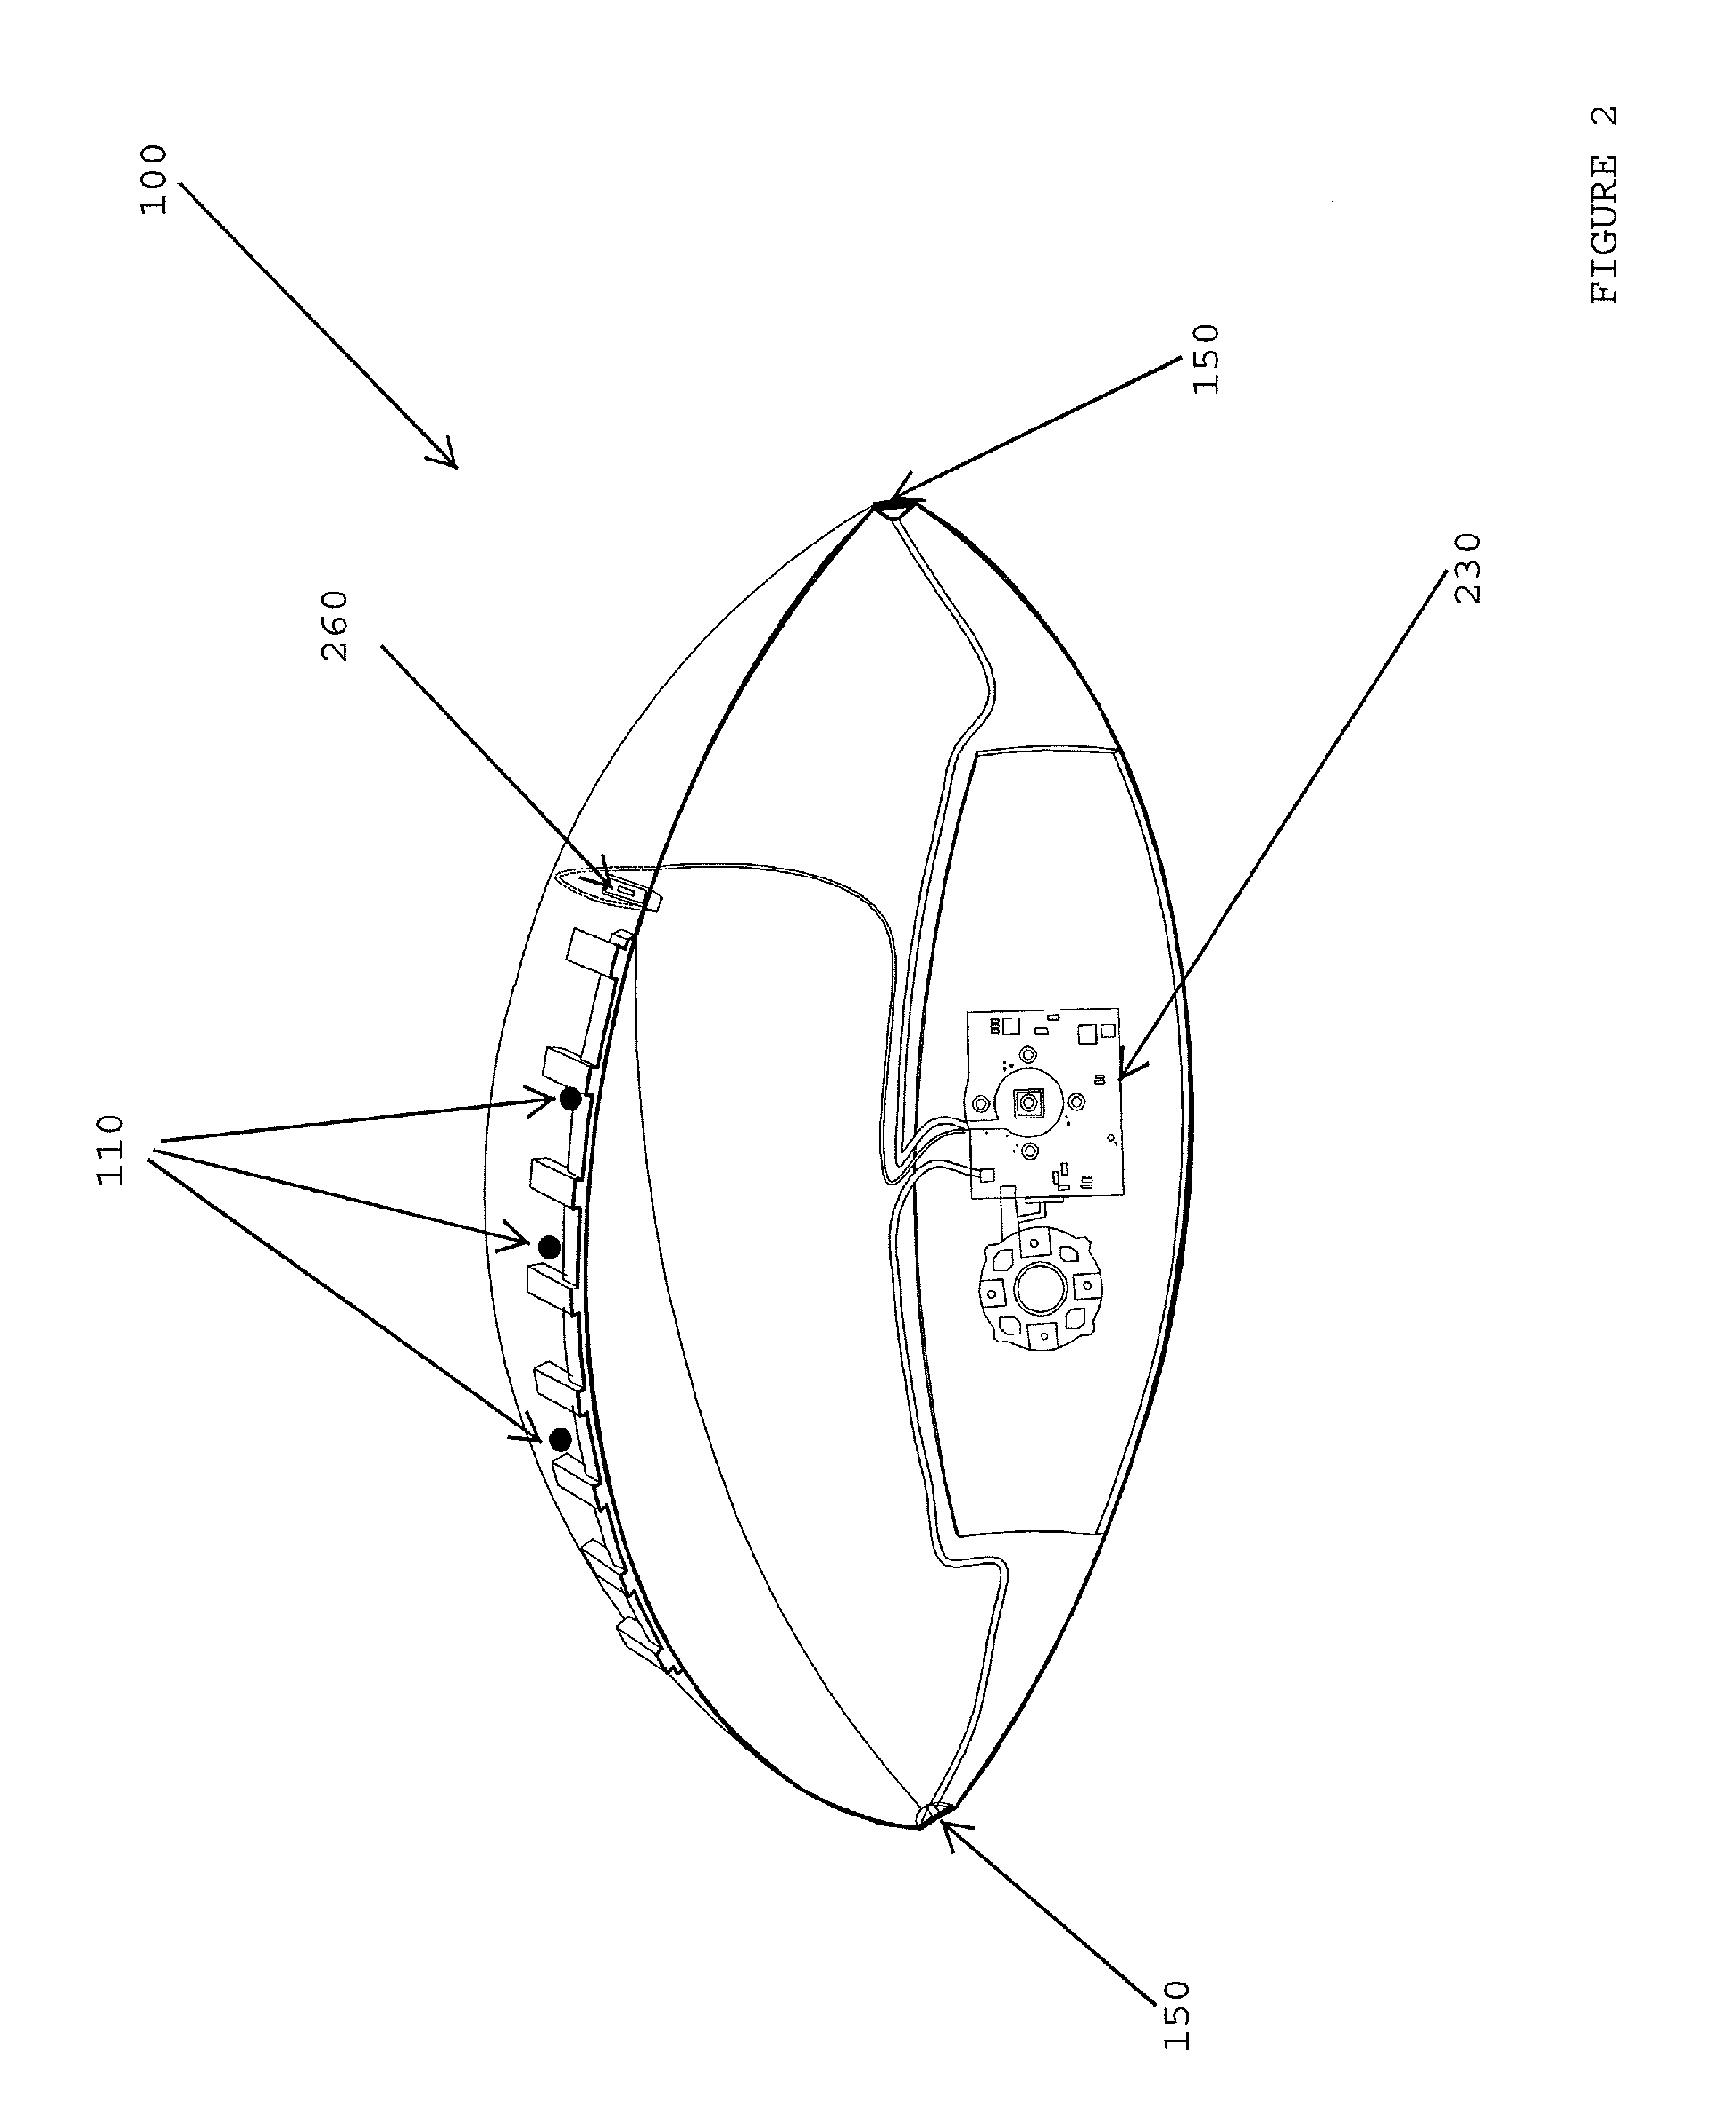 Sensor activated ball and sport accessory with computer functionalities